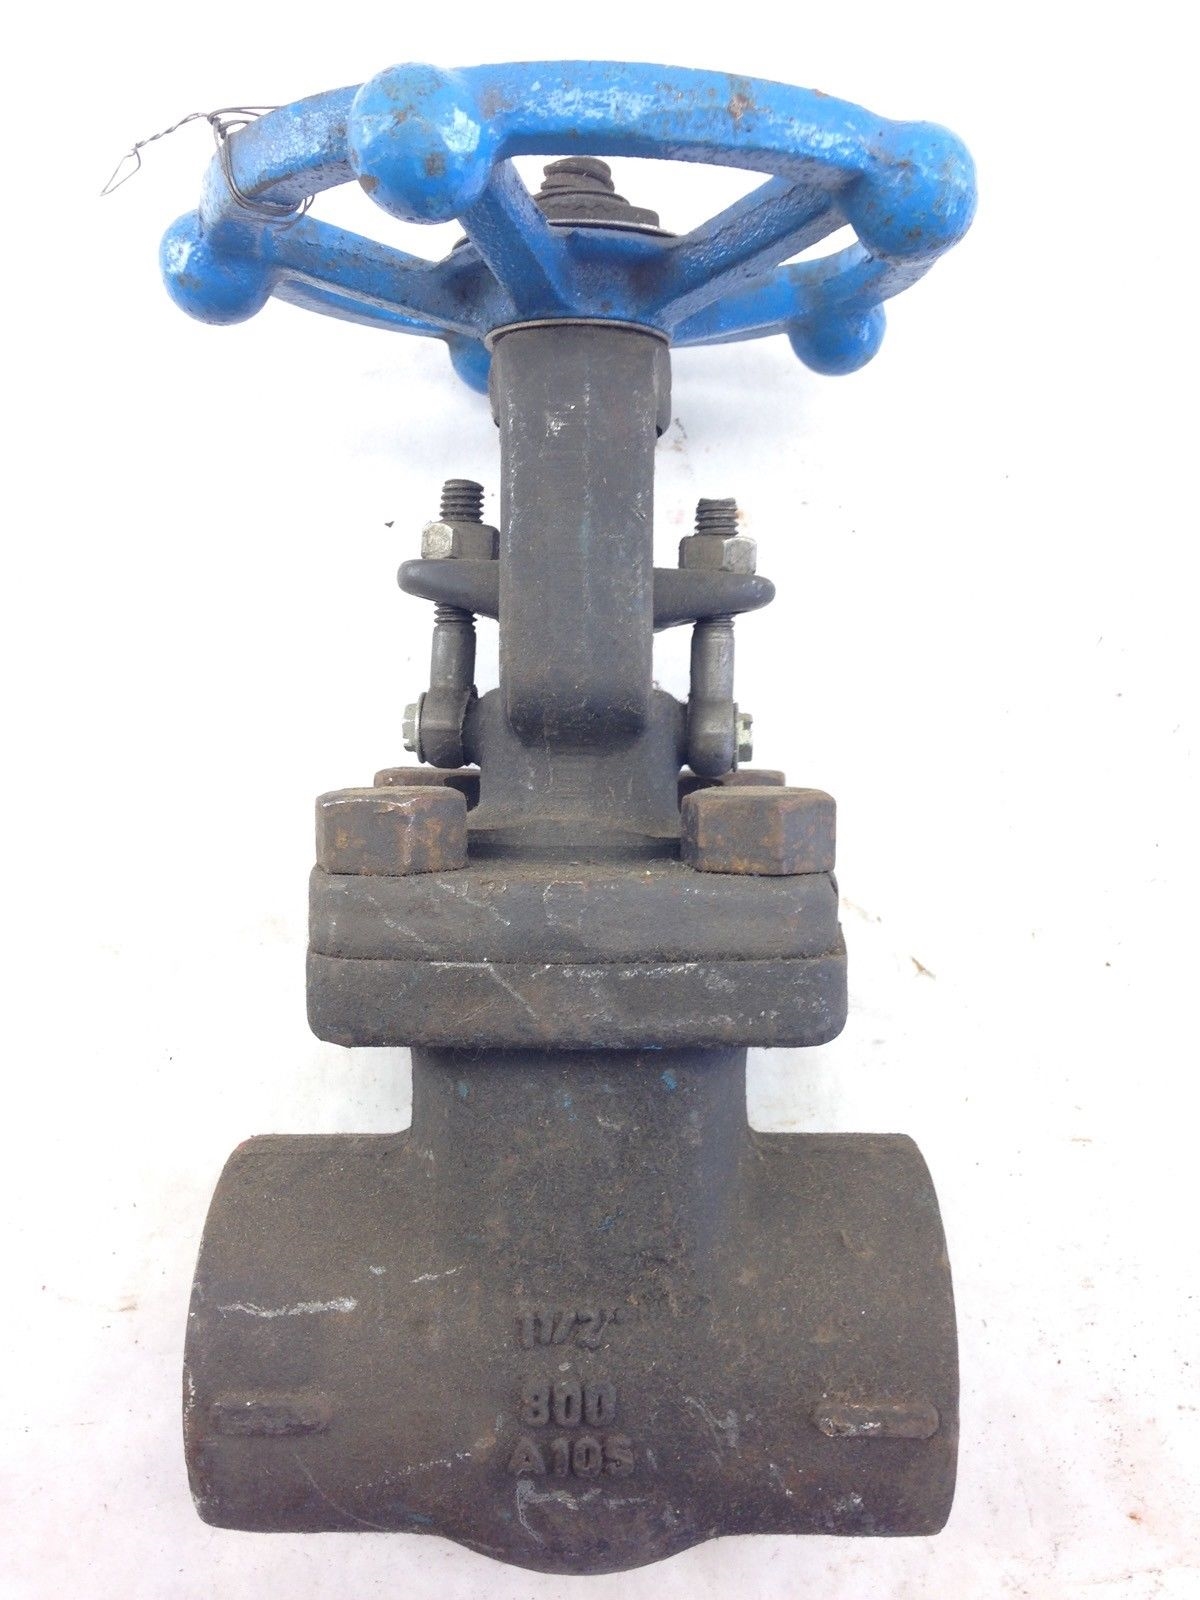 SMITH GATE VALVE A105 1-1/2″ 800 FORGED STEEL (B445) 1